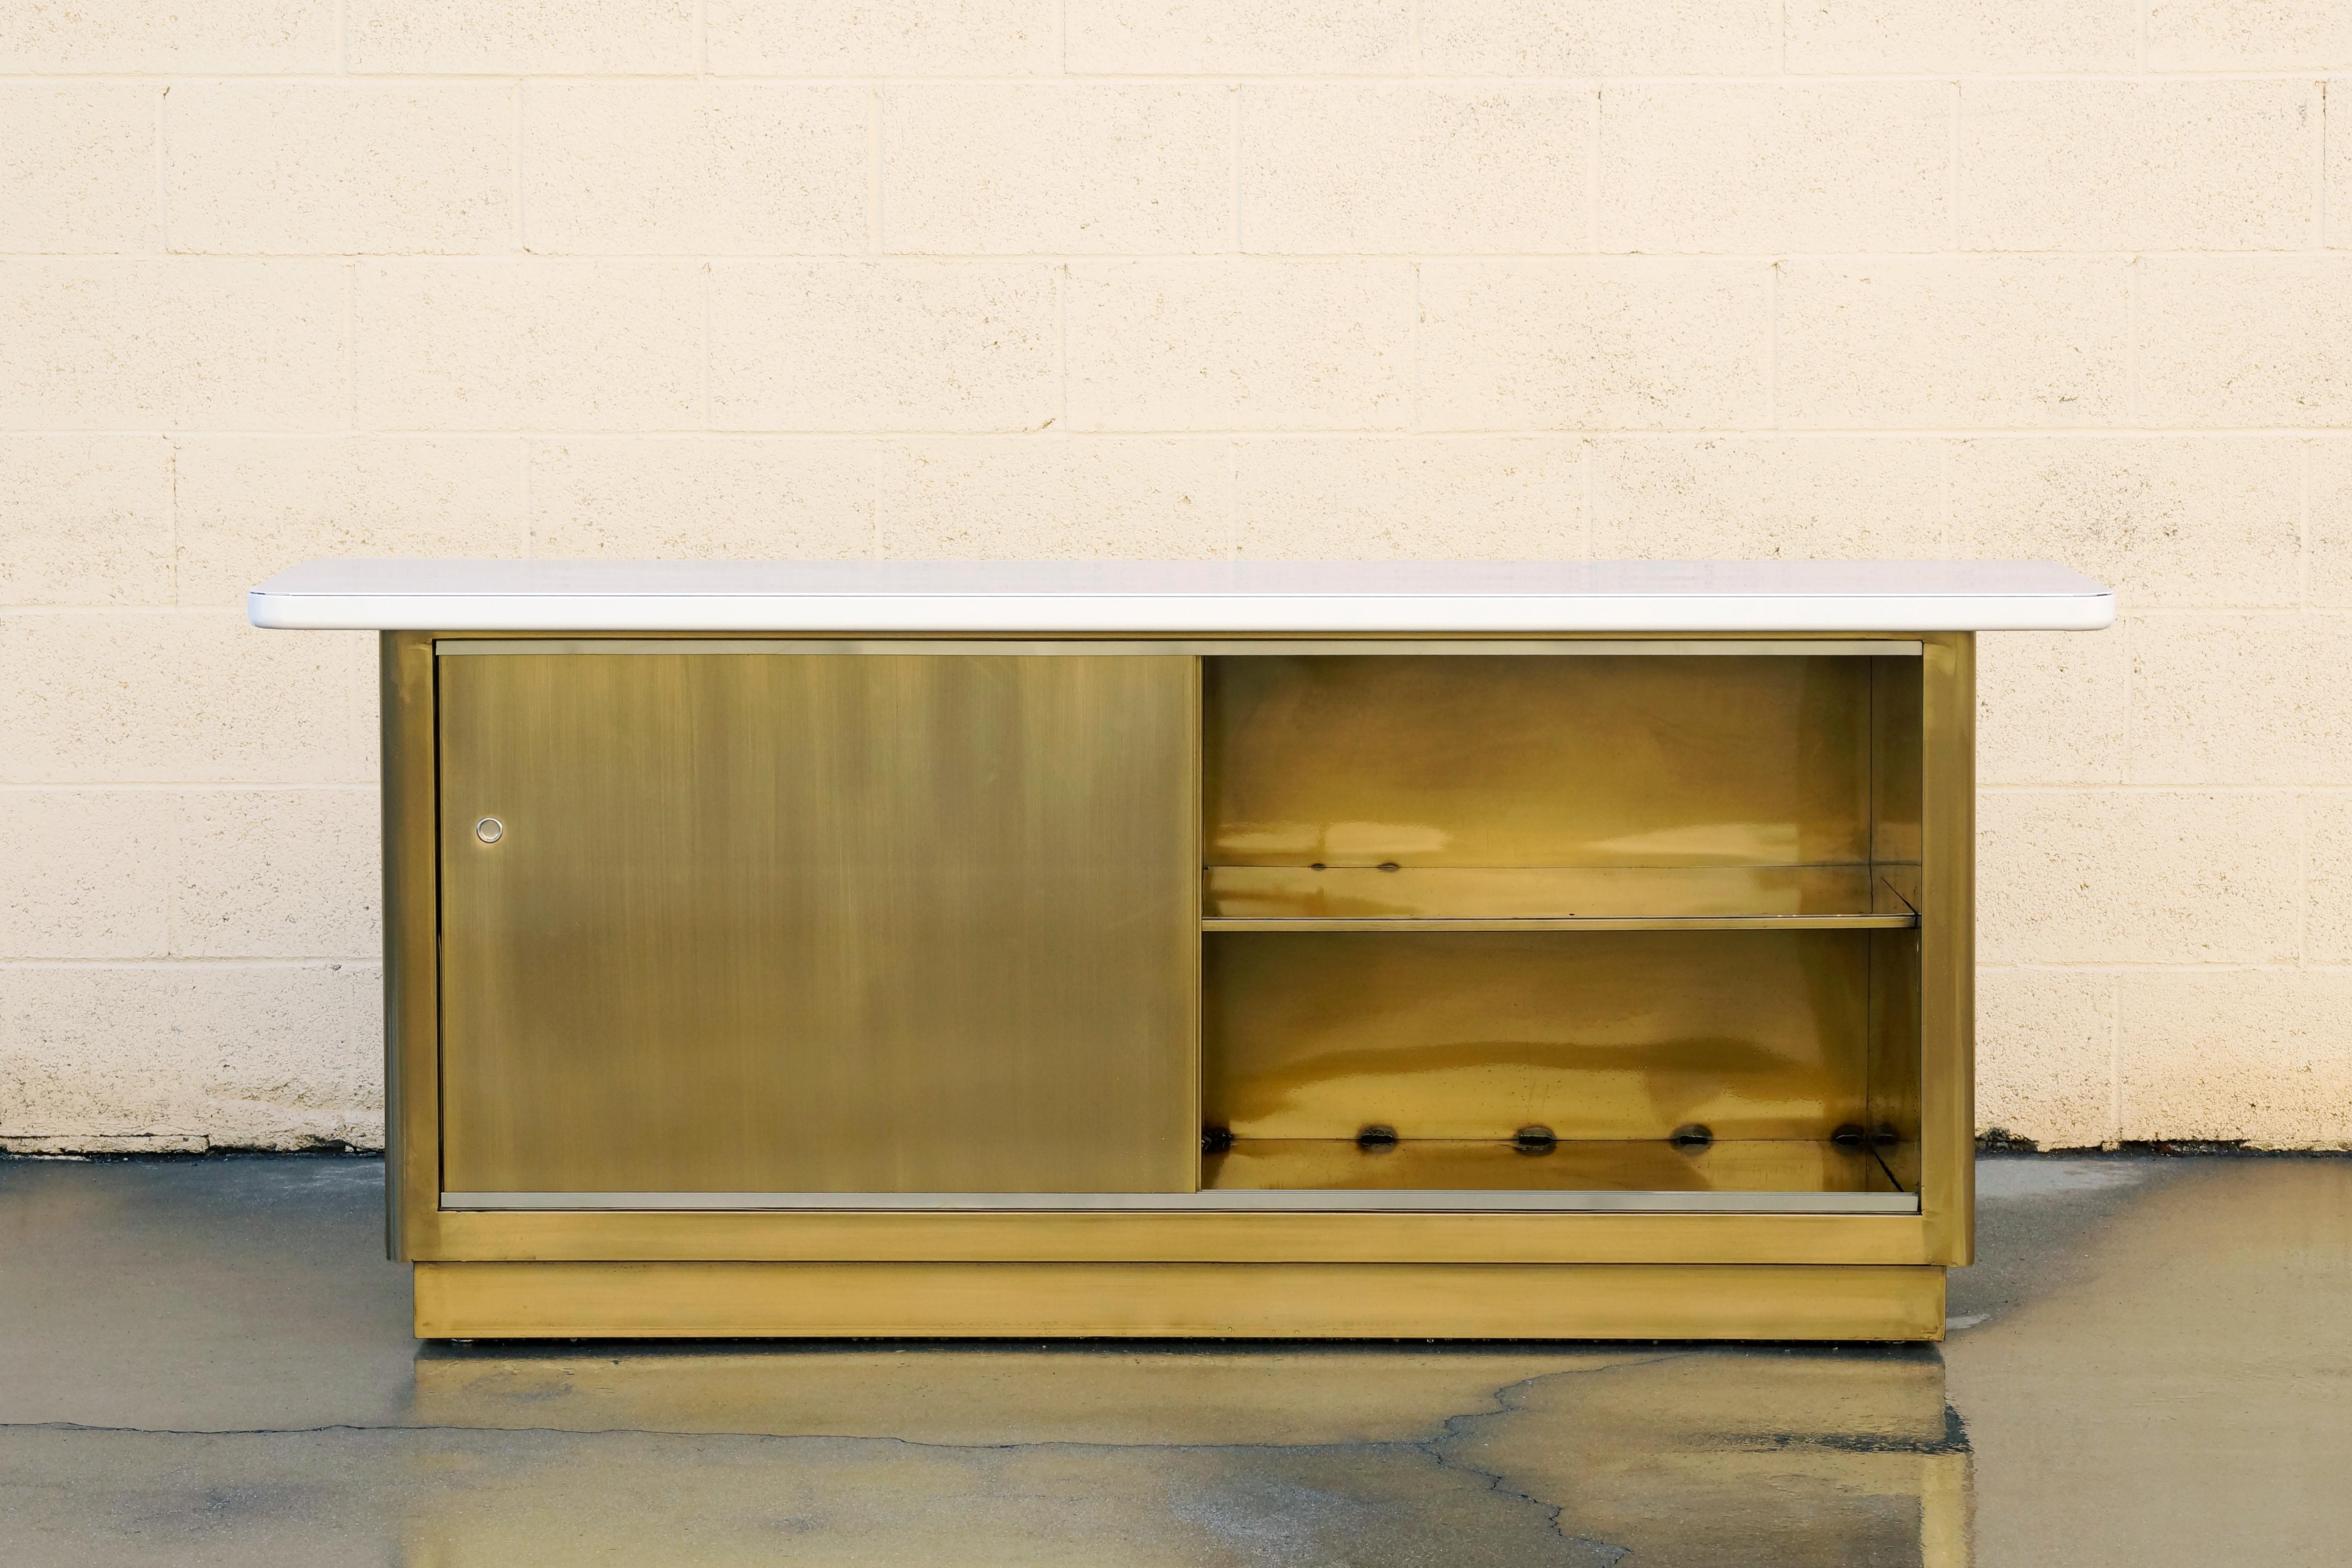 Custom made steel credenza inspired by tanker style furniture popular in the 1960s. This beauty features a two-tone brass and gloss white powder coated finish and double sliding doors with a single fixed shelf. Pairs perfectly with our custom